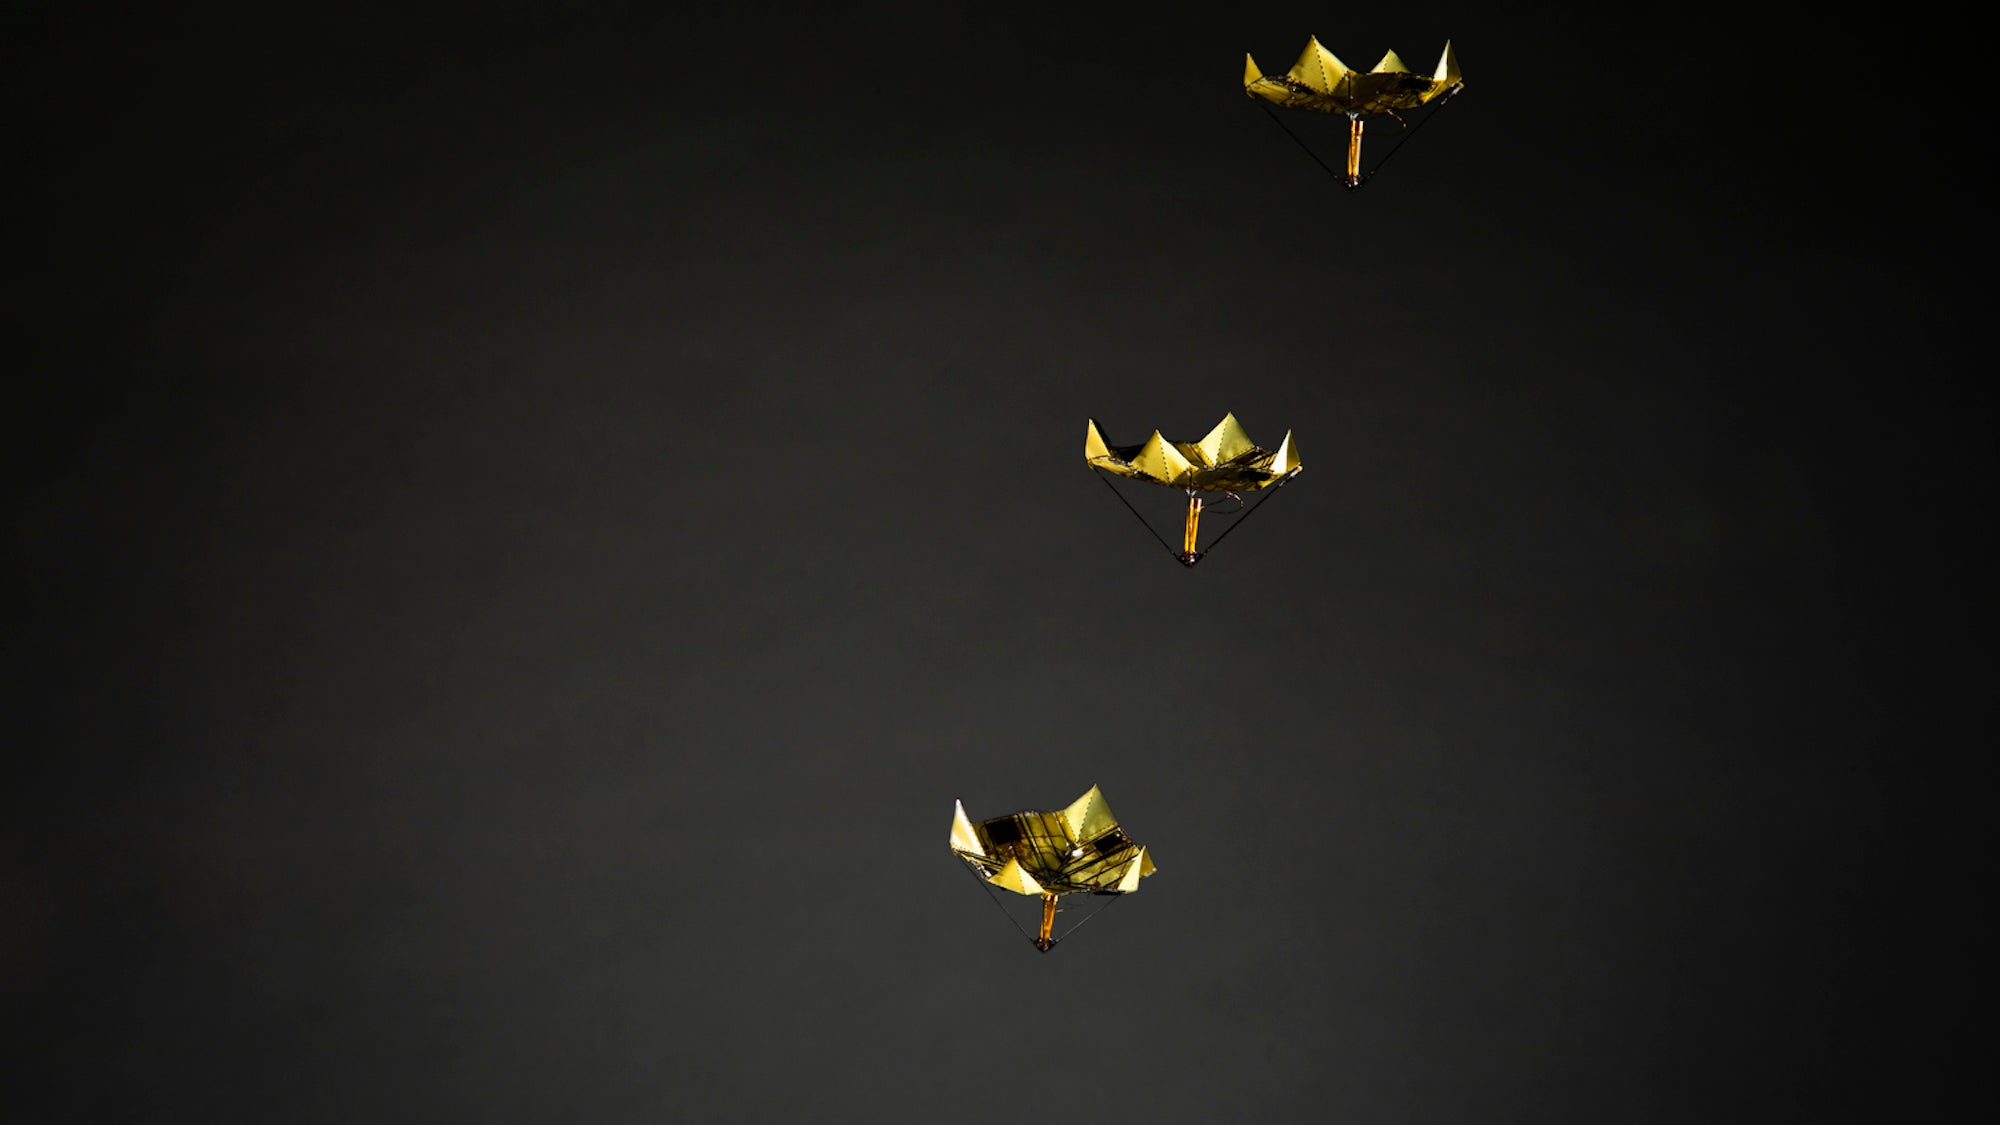 Time lapse image of origami microflier changing shape during descent